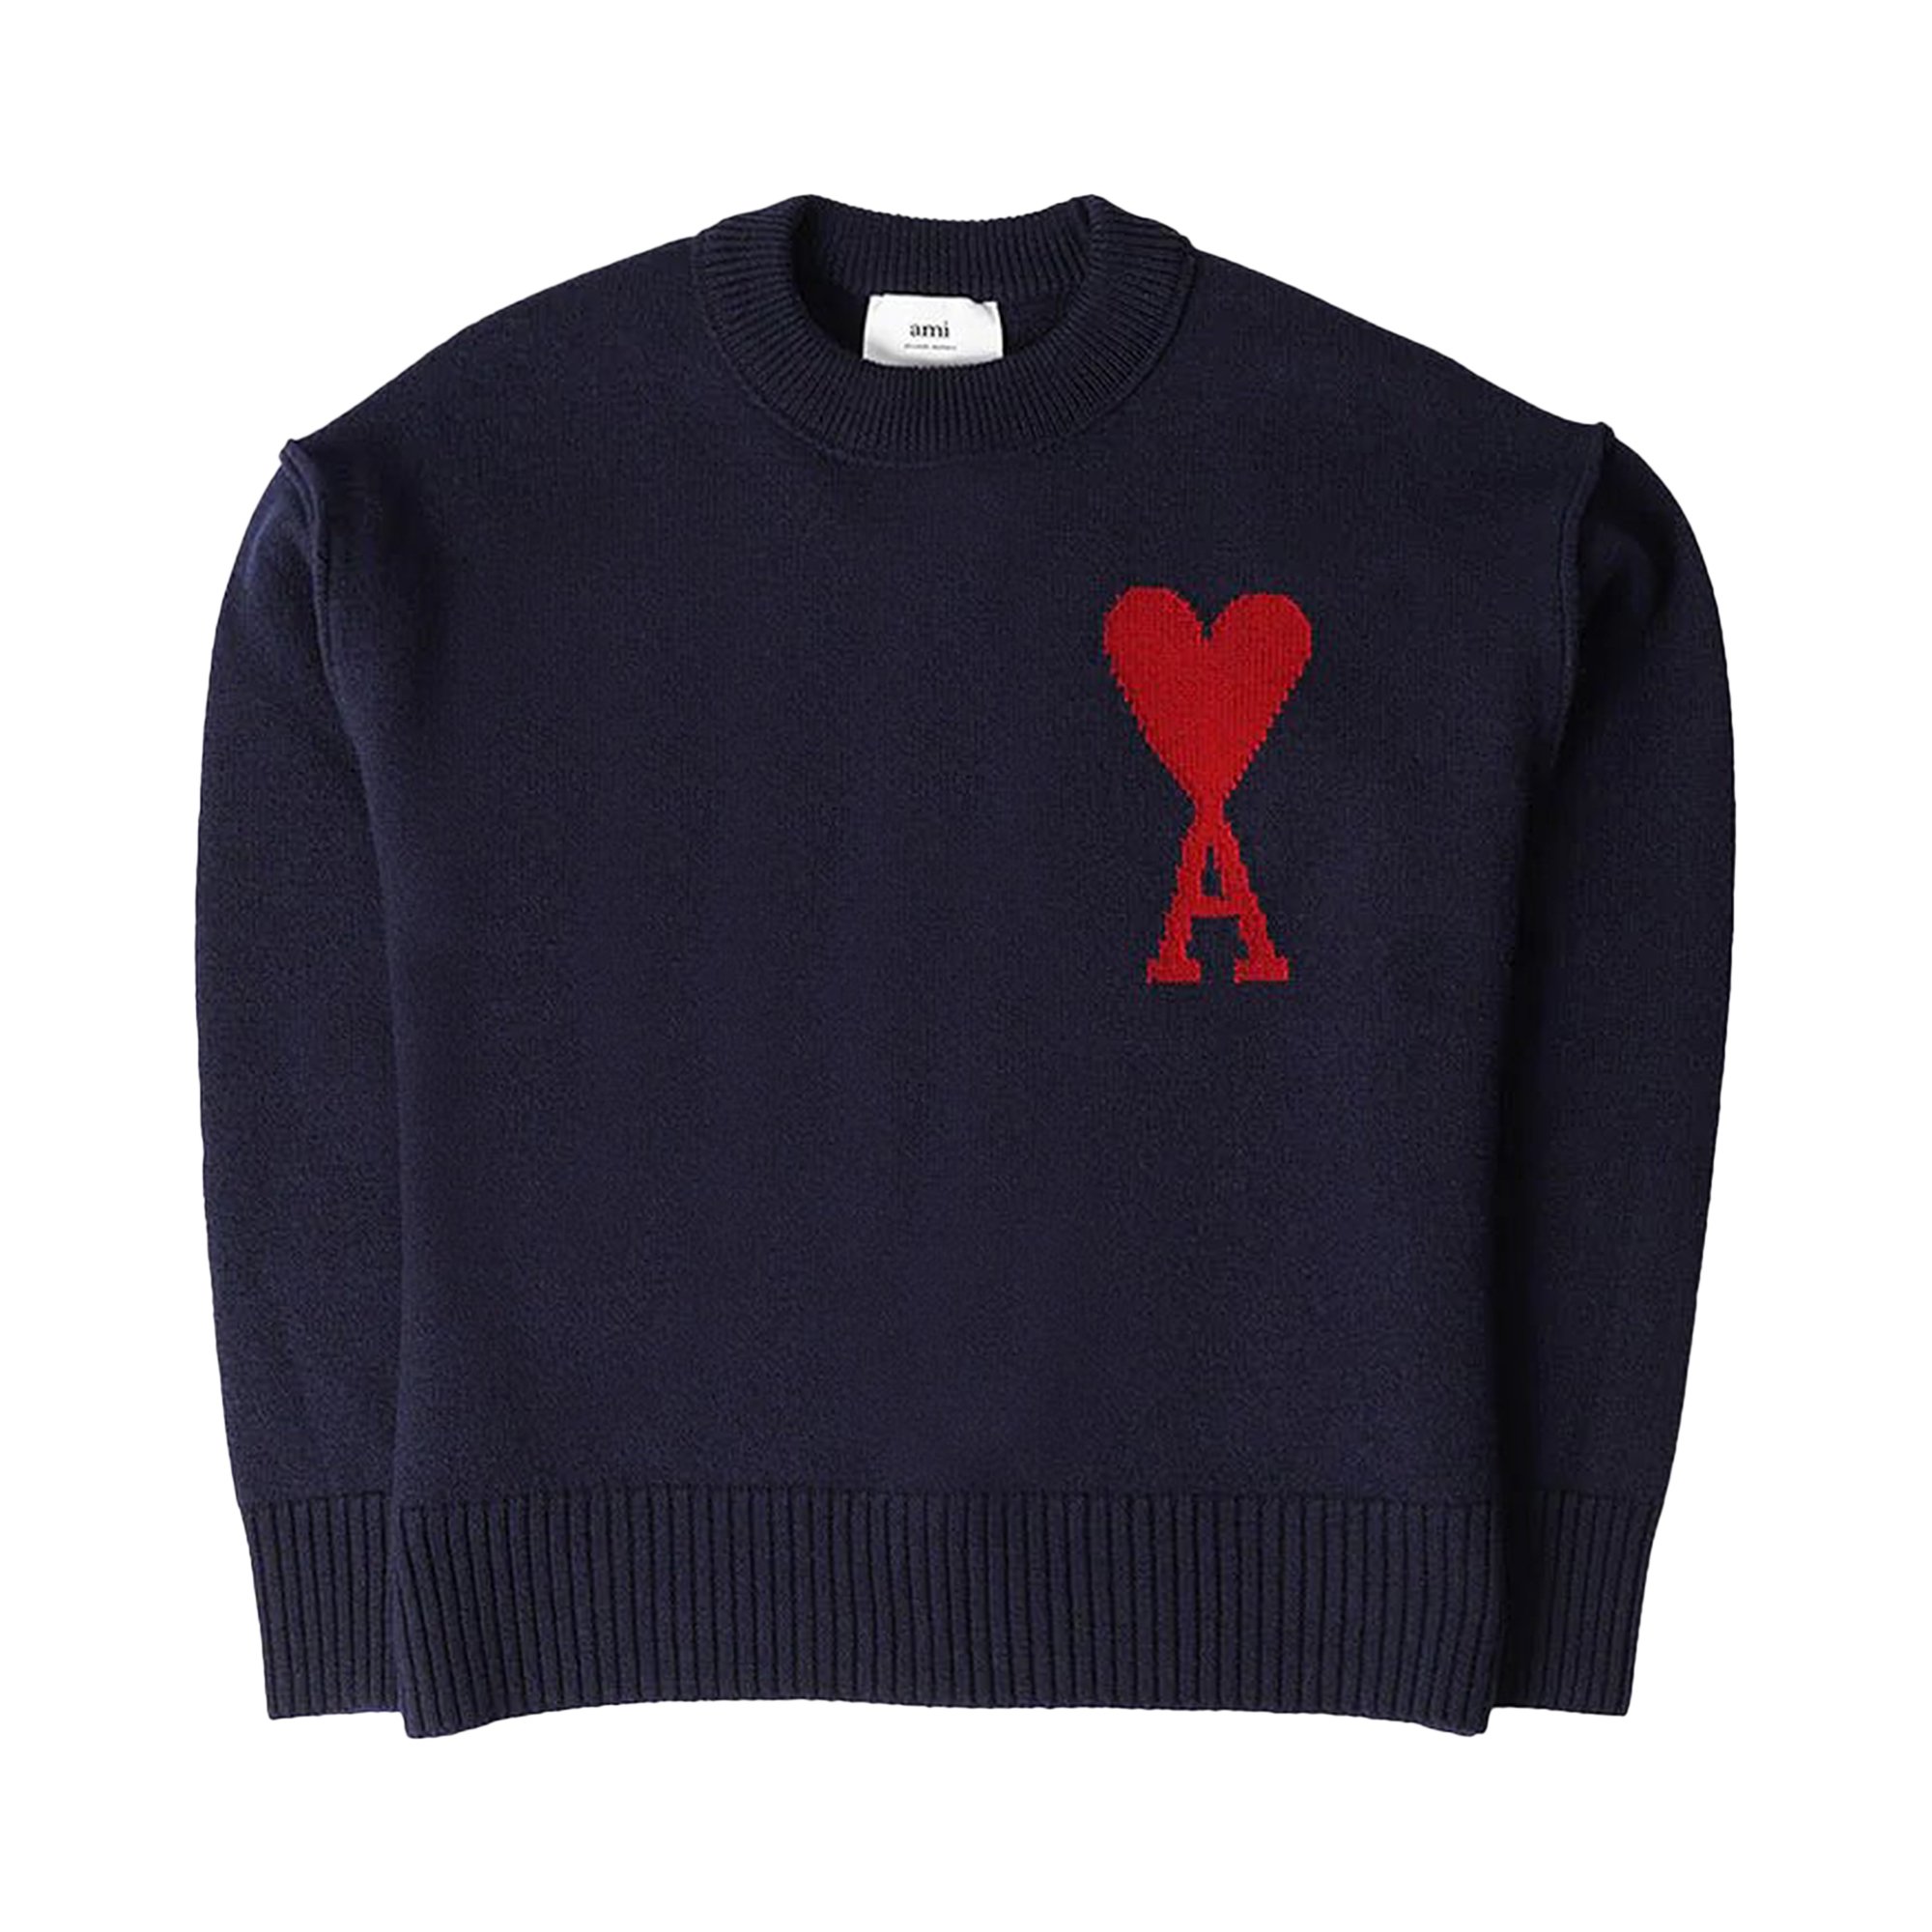 Ami Large Heart Sweater 'Blue/Red'